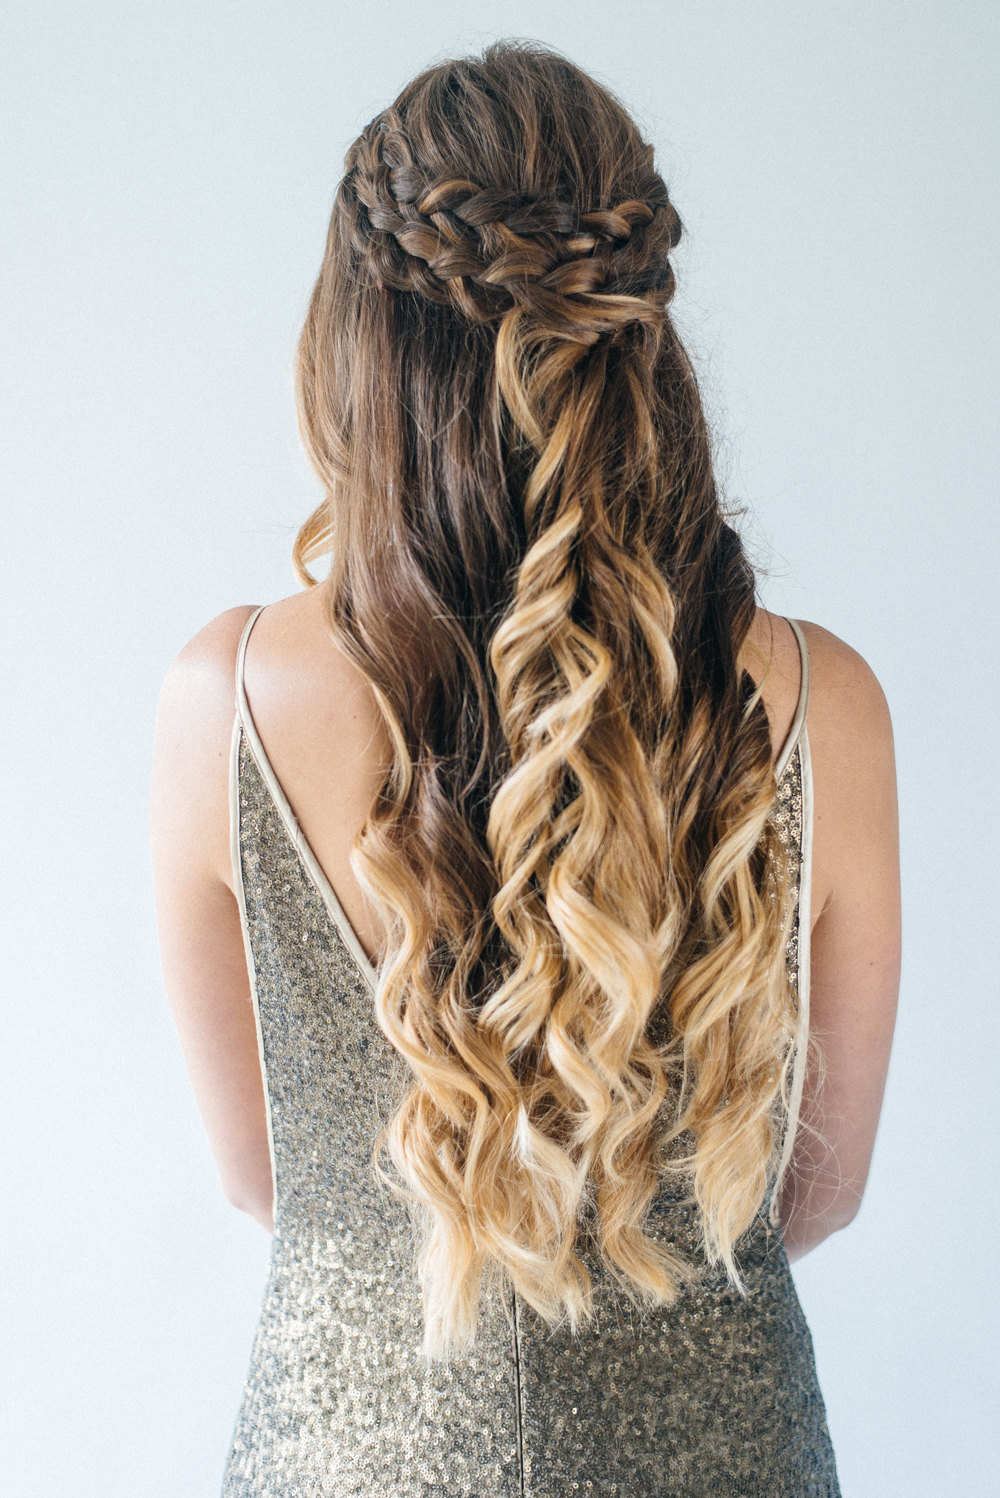 Inspiration For Half Up Half Down Wedding Hair With Tousled